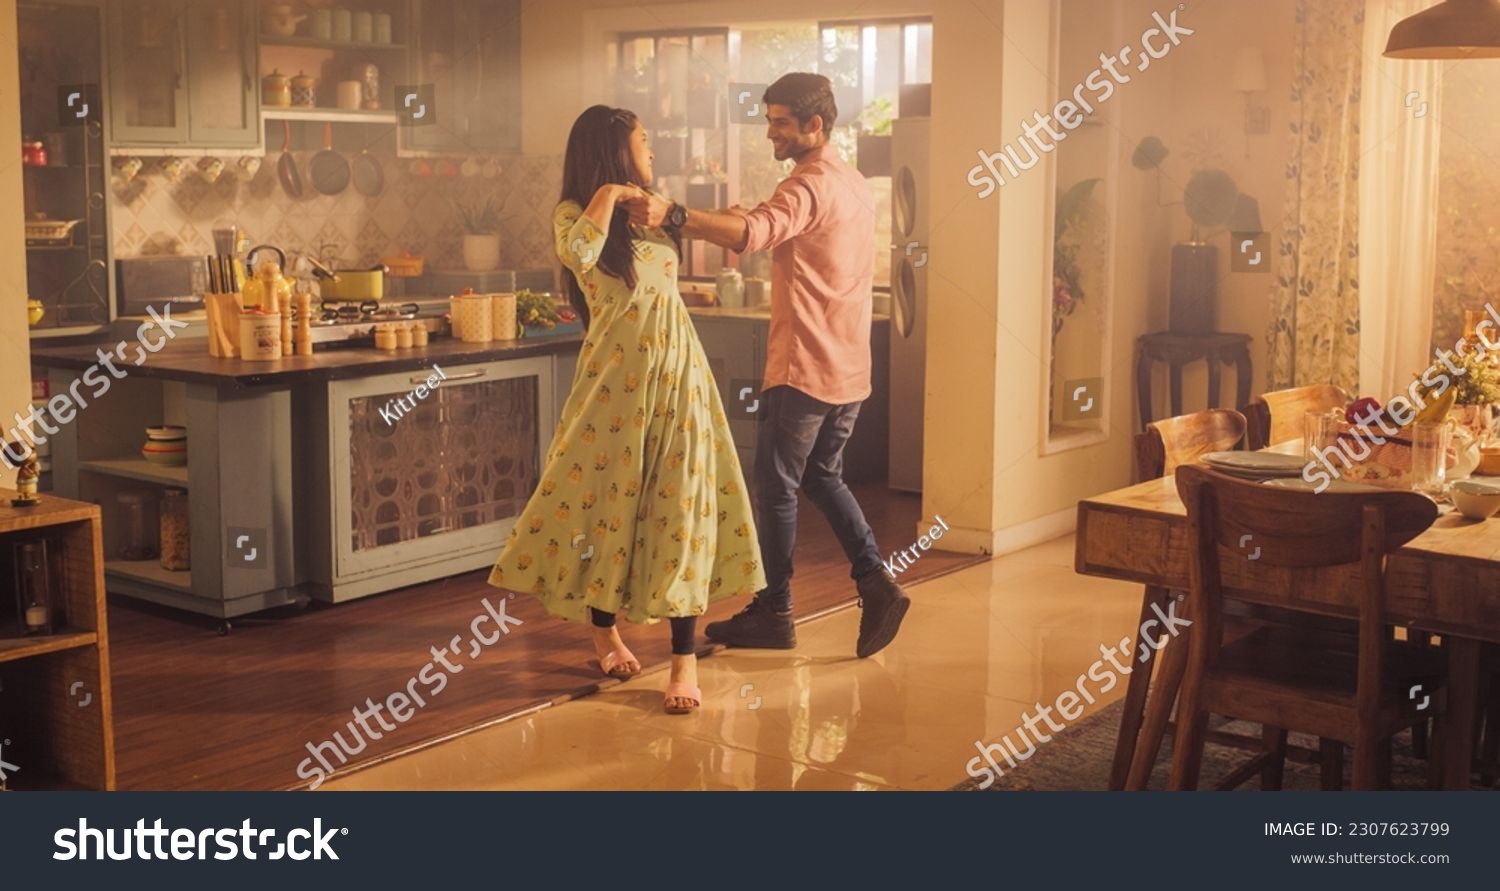 Young Couple Dancing and Having Fun in the Kitchen: Enjoying Each Other's Company and Playfully Moving to Music. With Joyful Laughter and Smiles, they Embrace the Music and Dance #2307623799